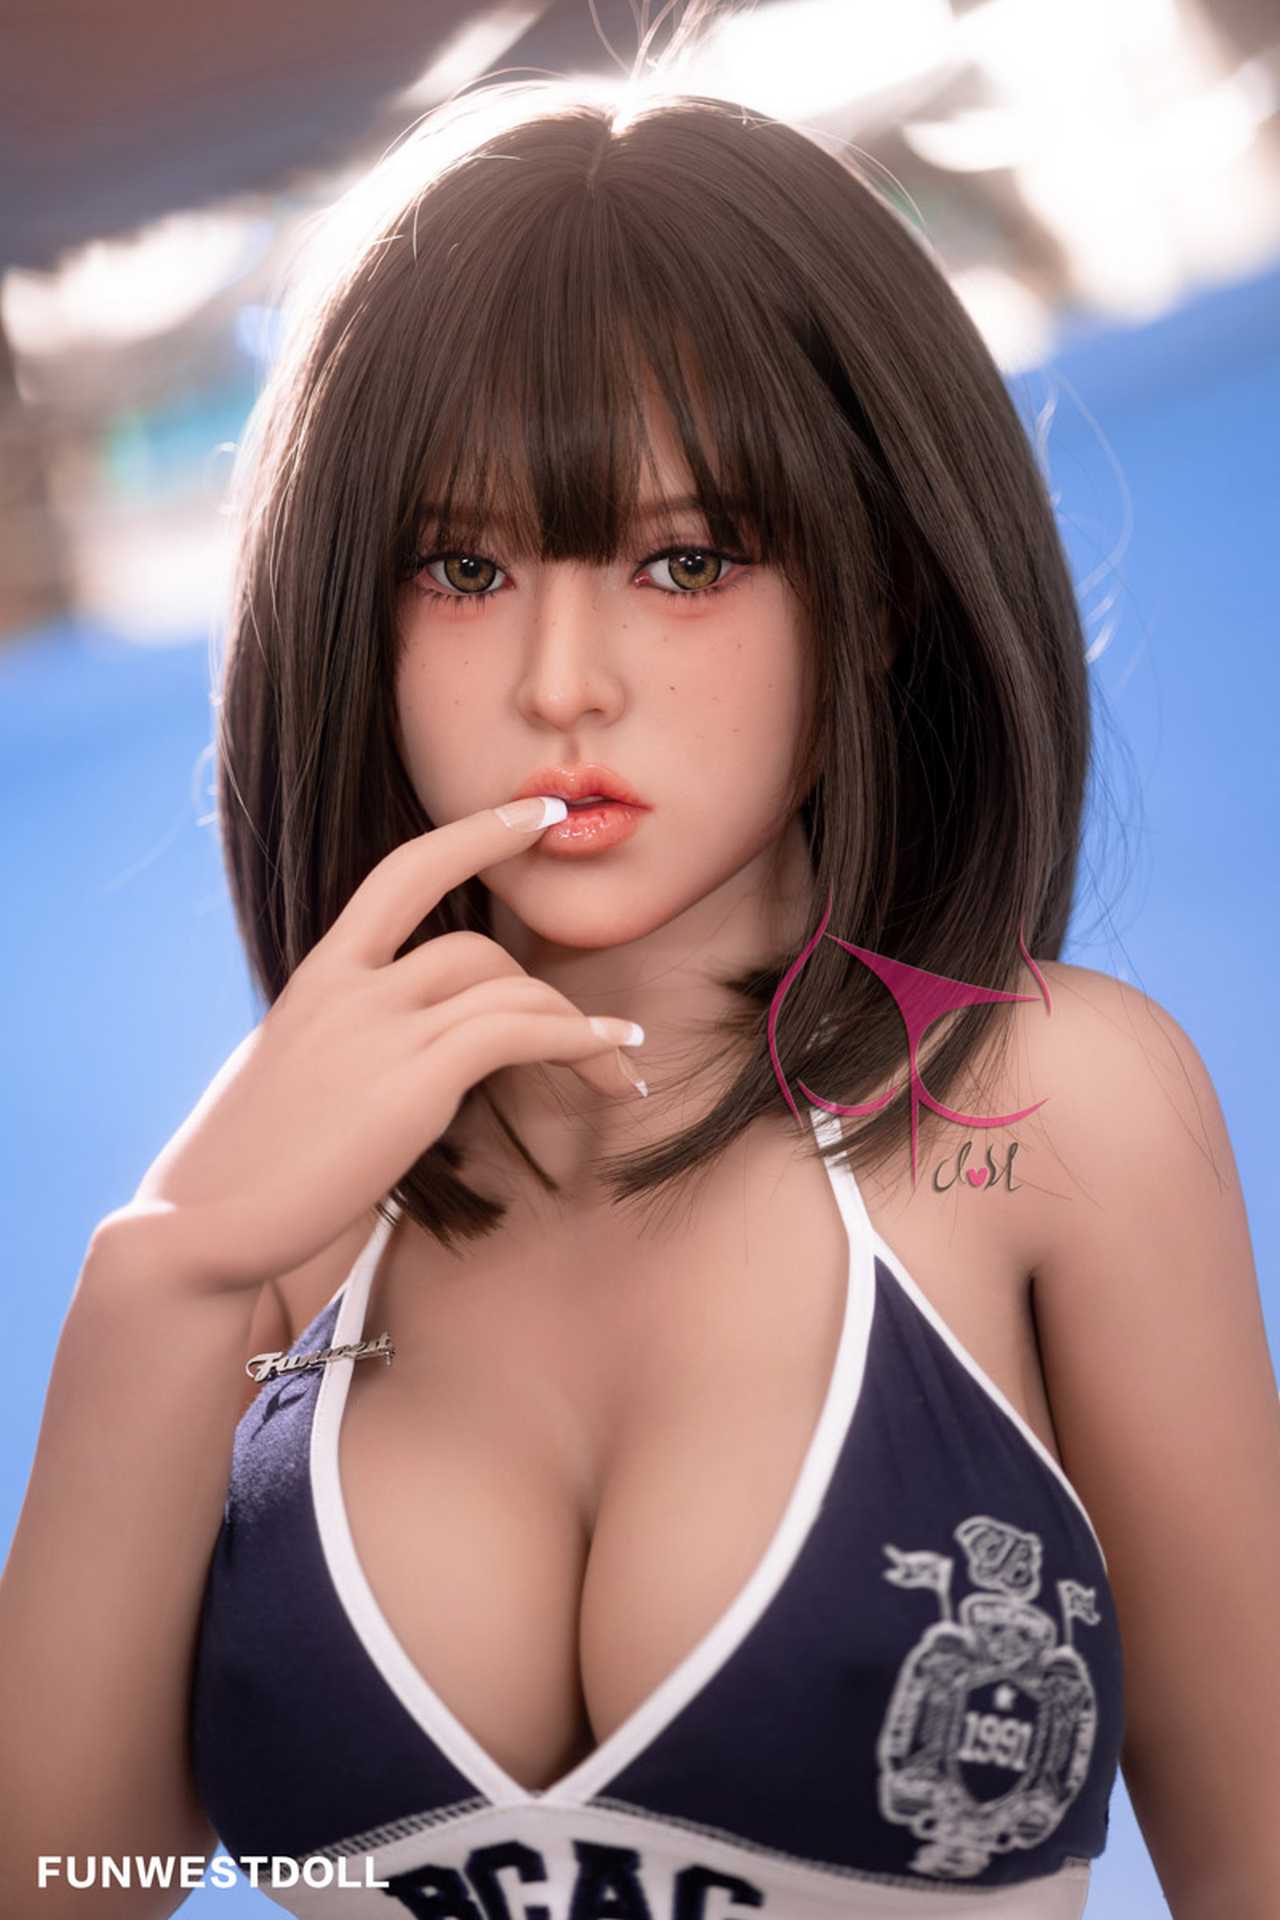 Funwest Ariya: Asian Sex Doll with F-Cup Breasts in Hot Training Outfit